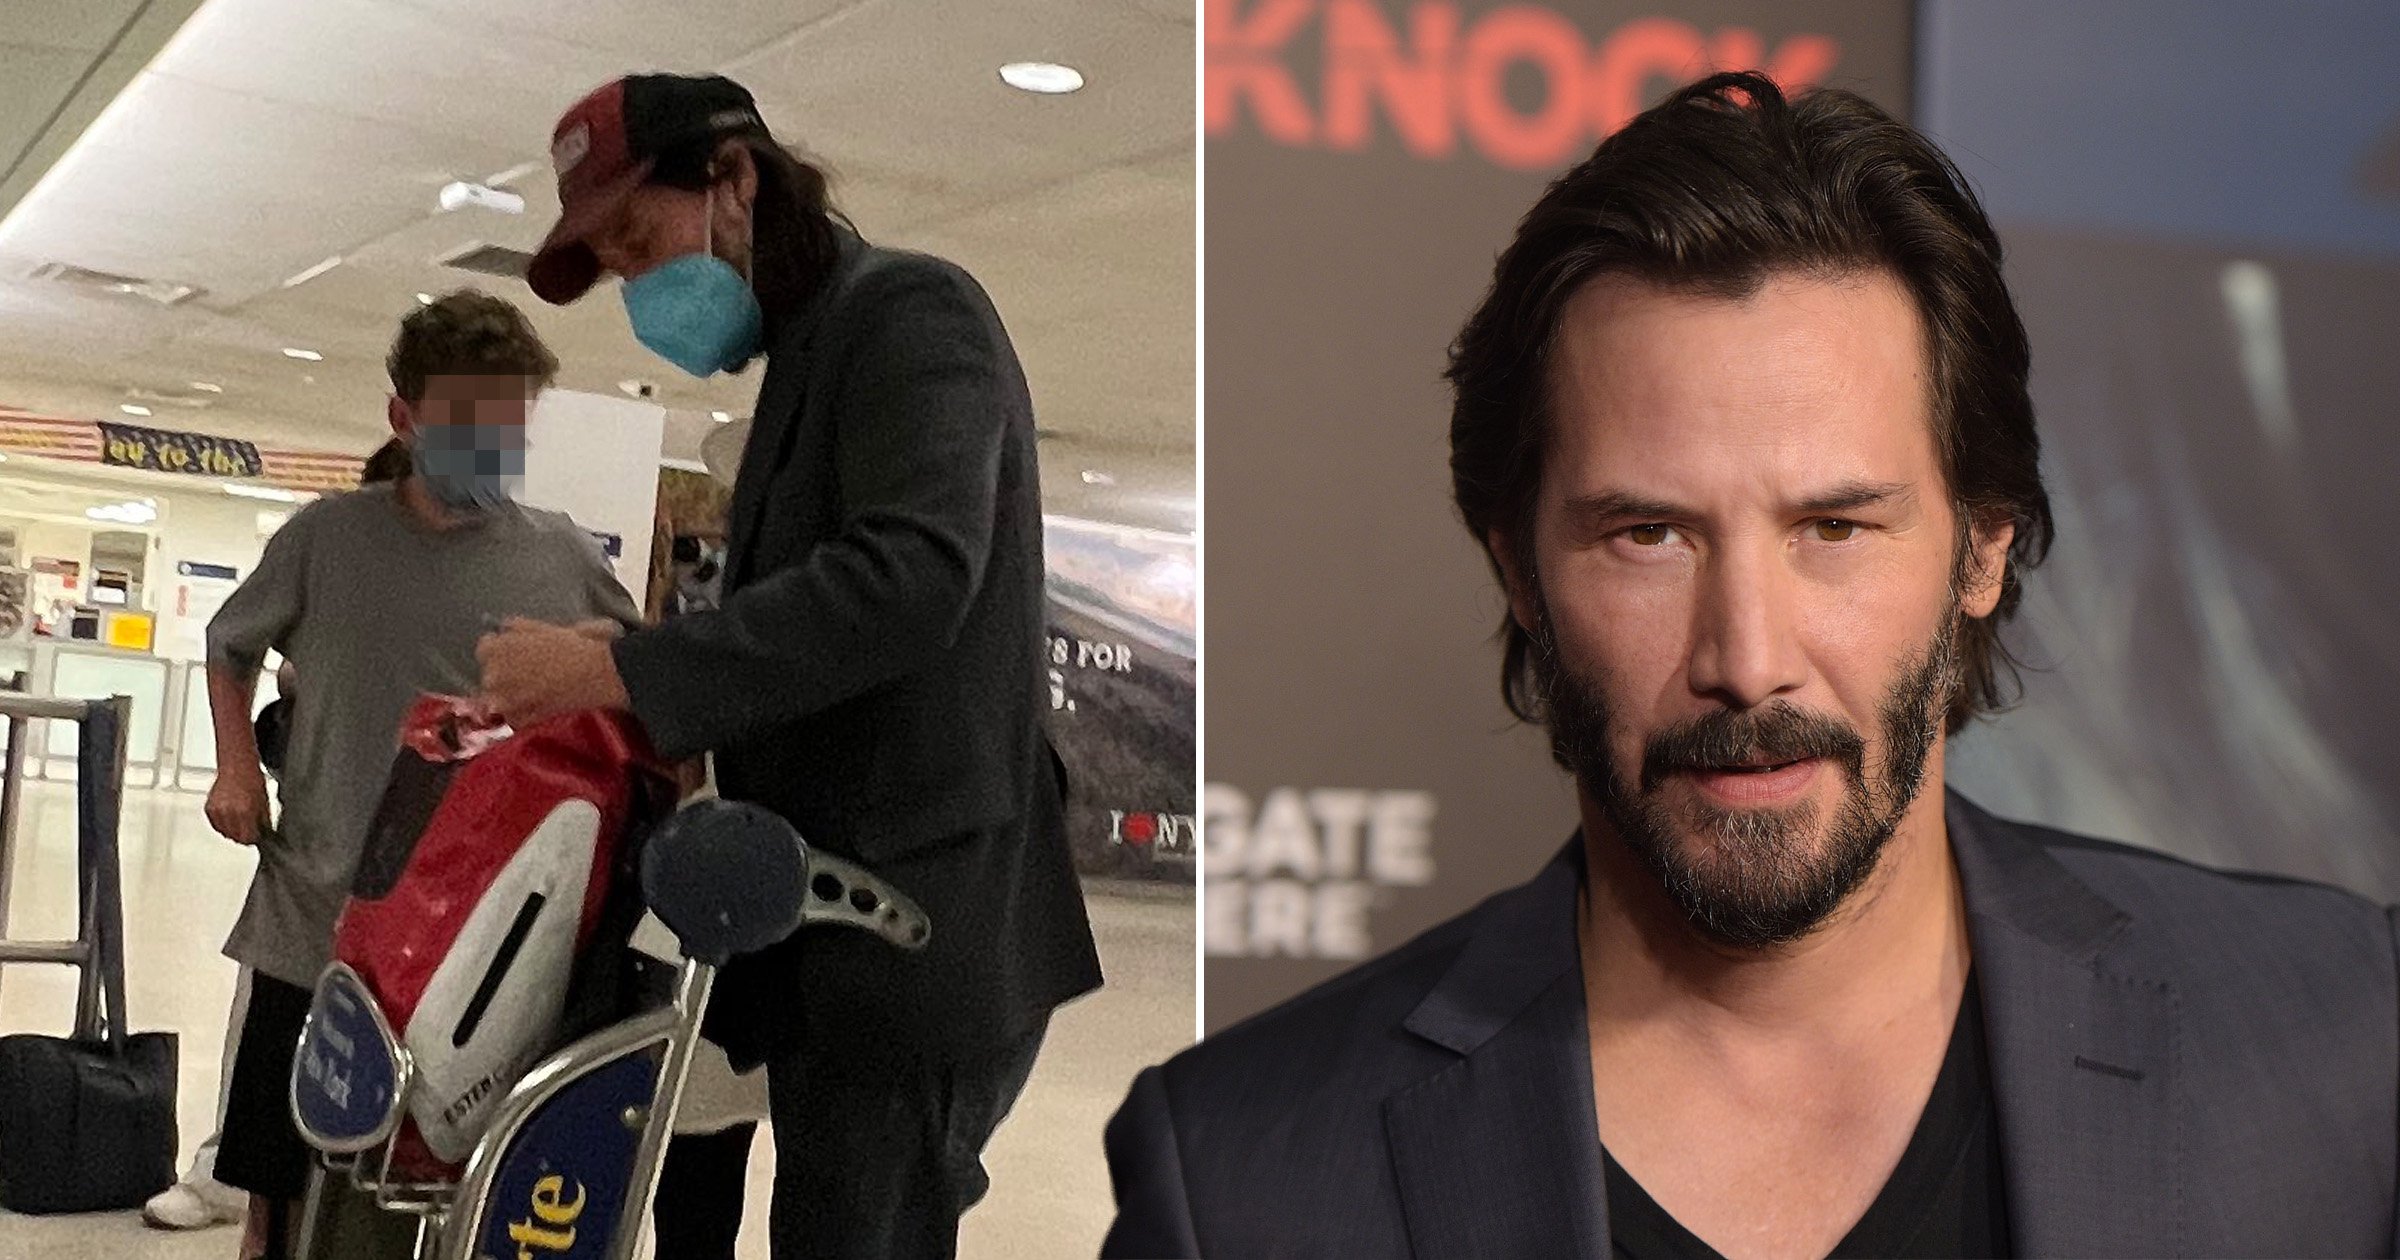 Keanu Reeves is Hollywood’s most wholesome man once again as he’s got plenty of time for young fan’s questions despite long-haul flight